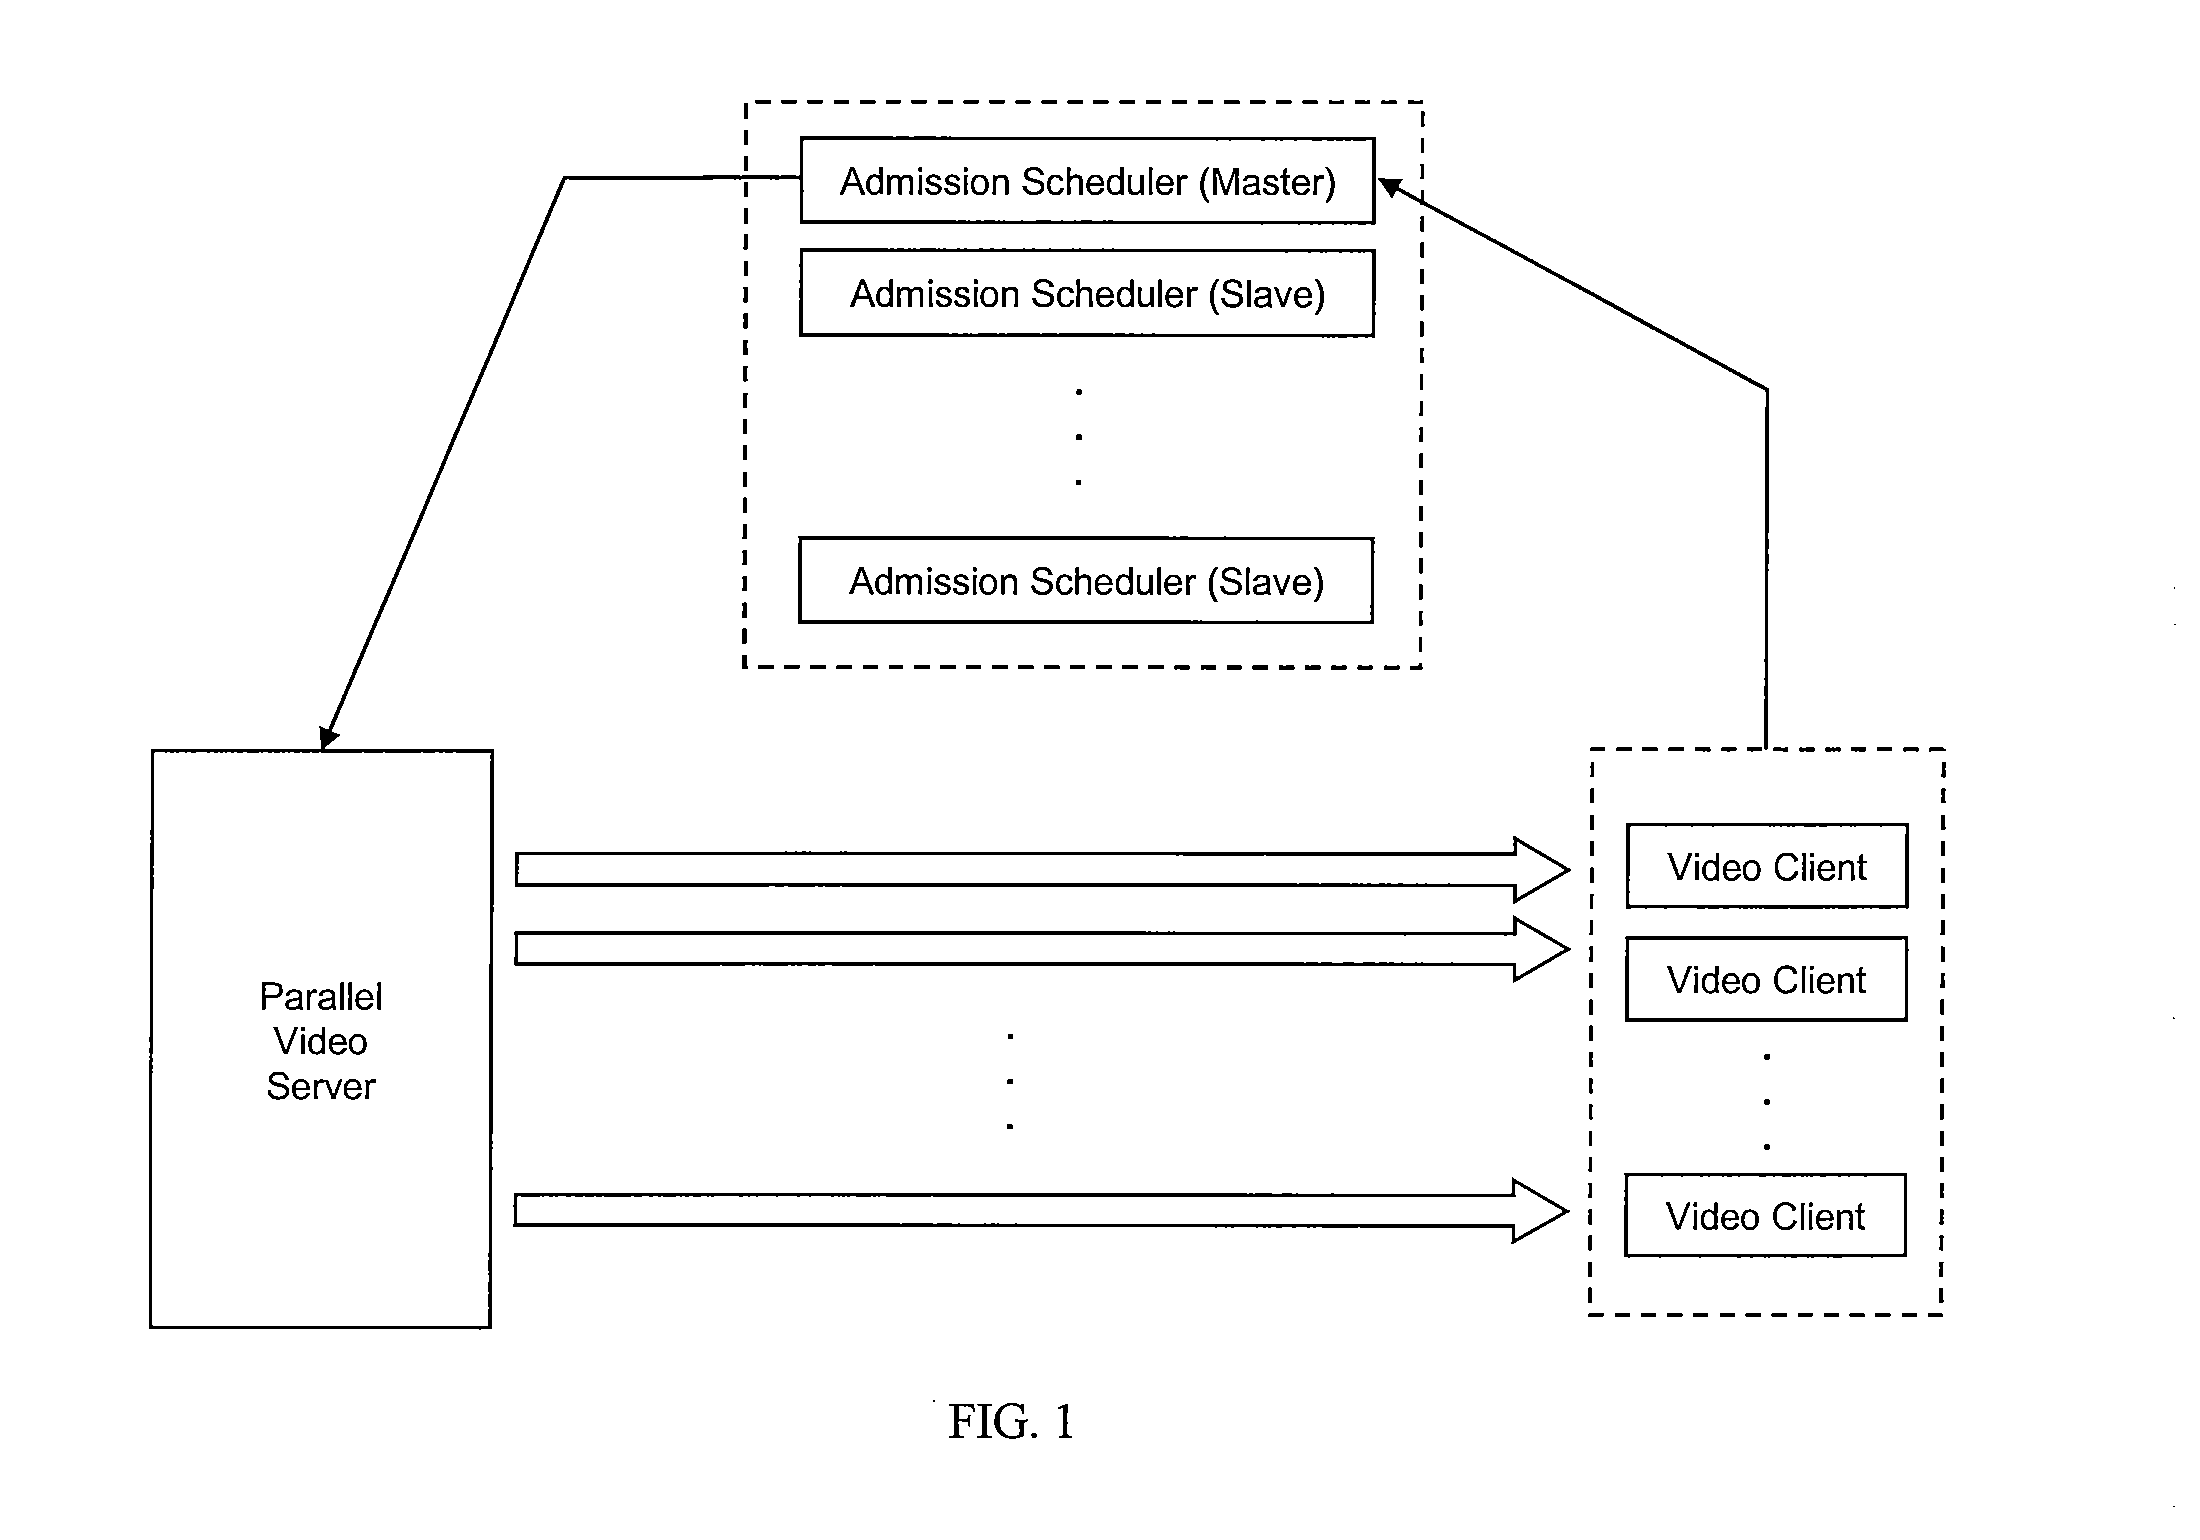 Load balancing and admission scheduling in pull-based parallel video servers